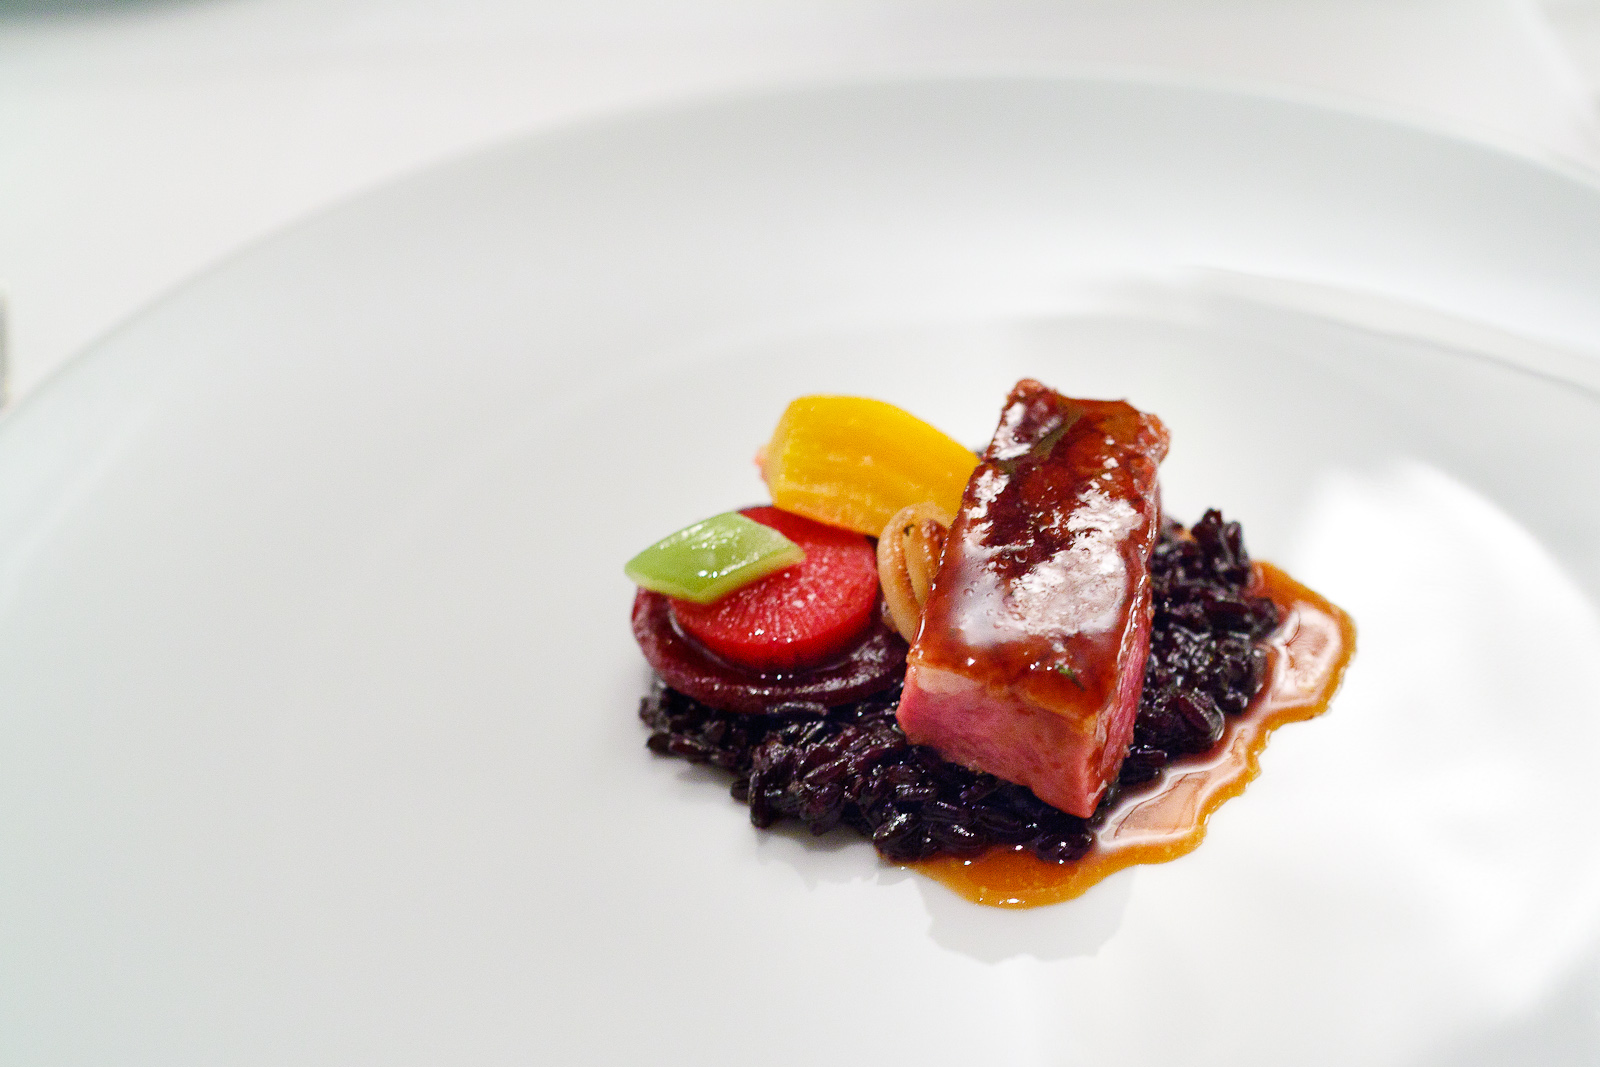 7th Course: Duck breast, Chinese rice, colorful beets